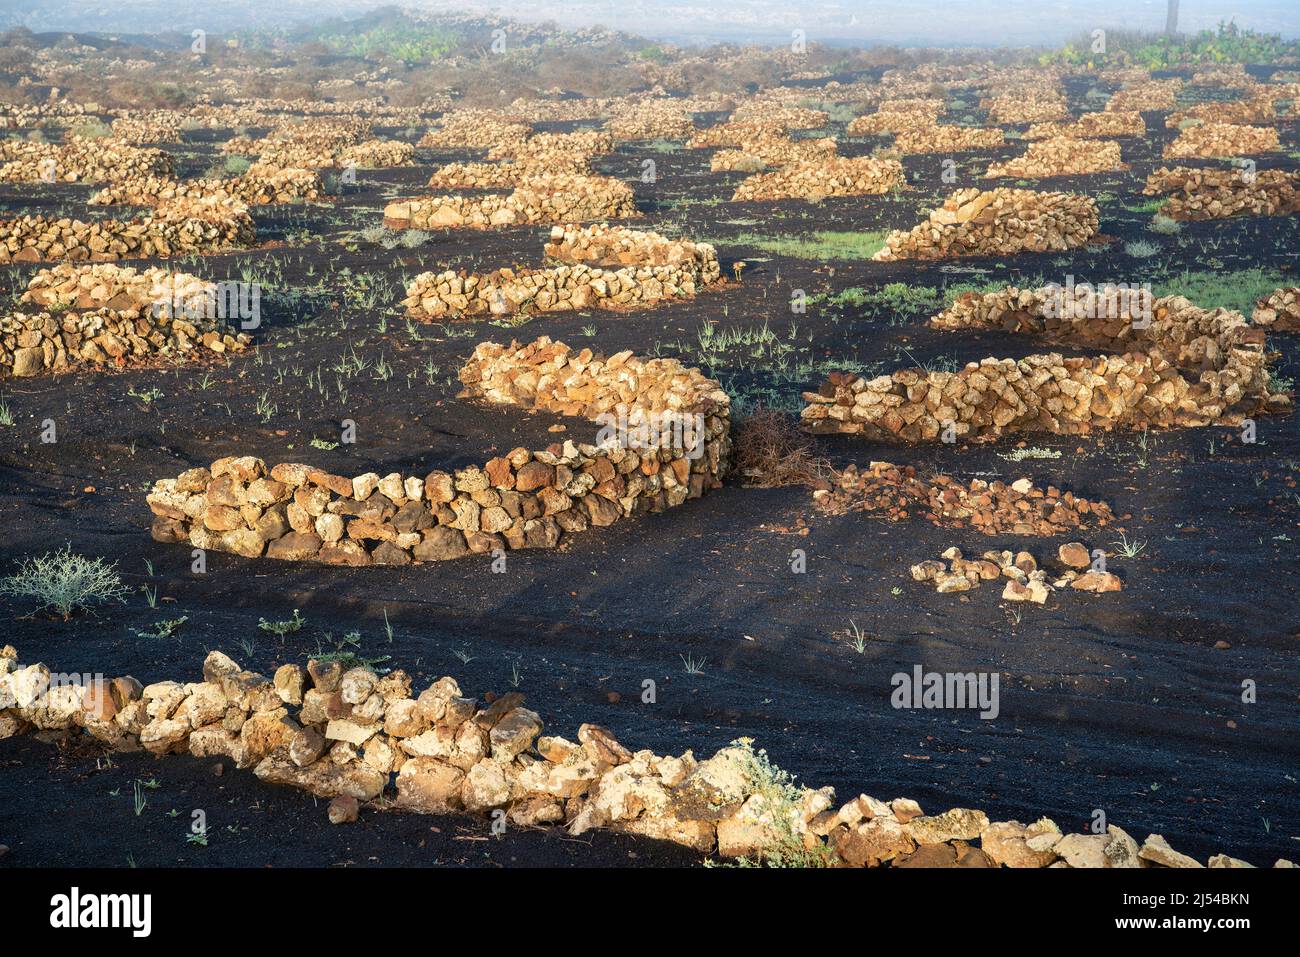 Grapevines with wall made from lava rocks in morning mist, vine cultivation on volcanic ash, dry cultivation method, Canary Islands, Lanzarote, La Ger Stock Photo